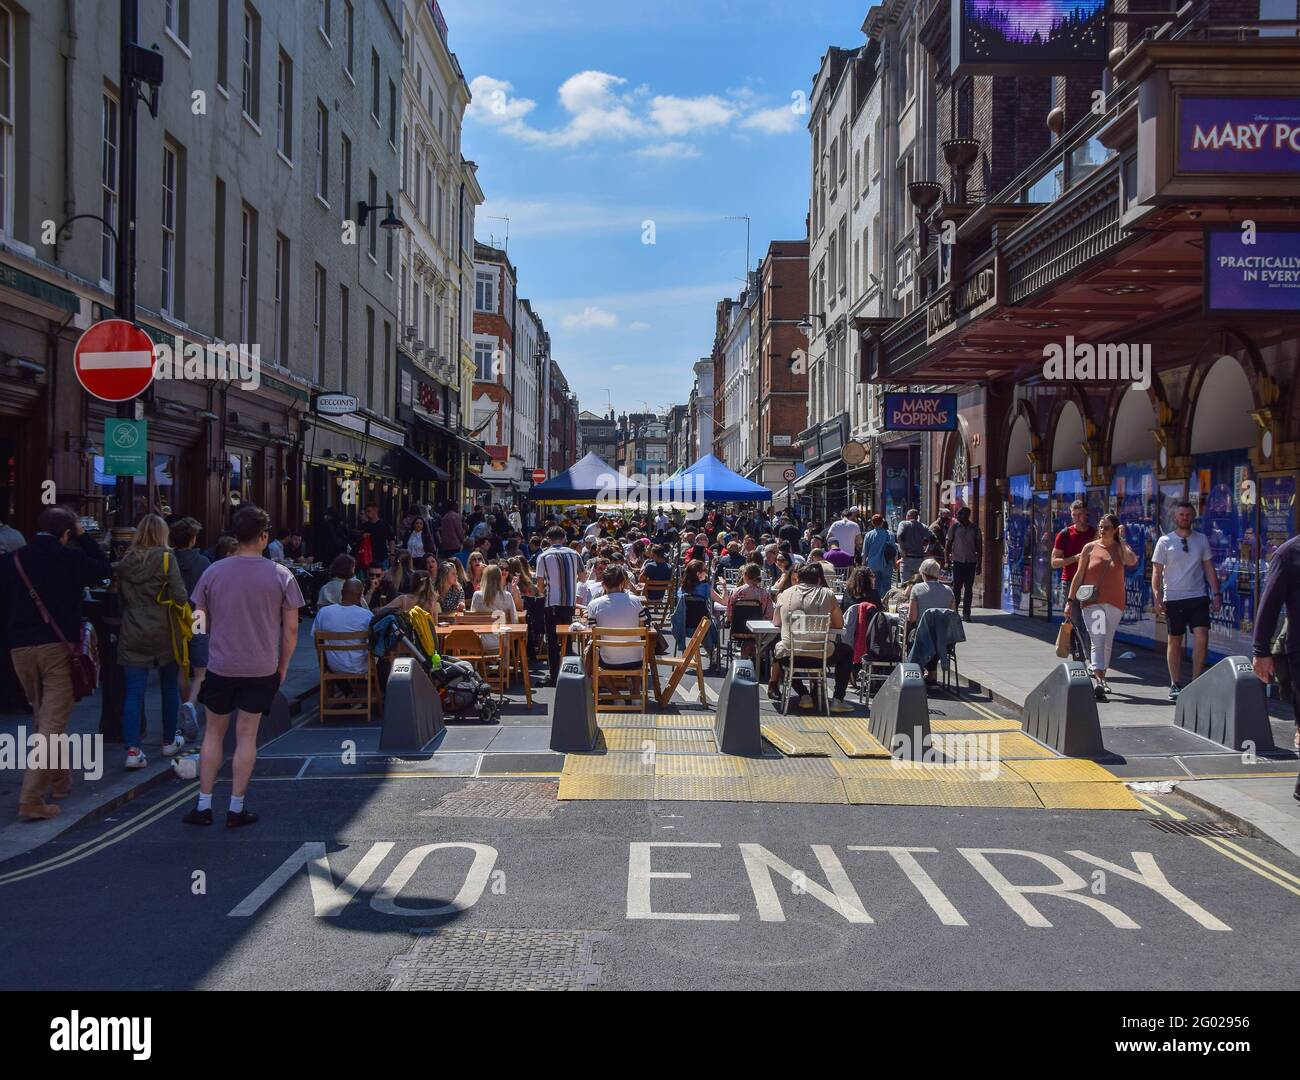 London, United Kingdom. 30th May 2021. Packed restaurants and cafes in Old Compton Street, Soho. Crowds of people flocked to the West End as temperatures rose over the bank holiday weekend. Stock Photo